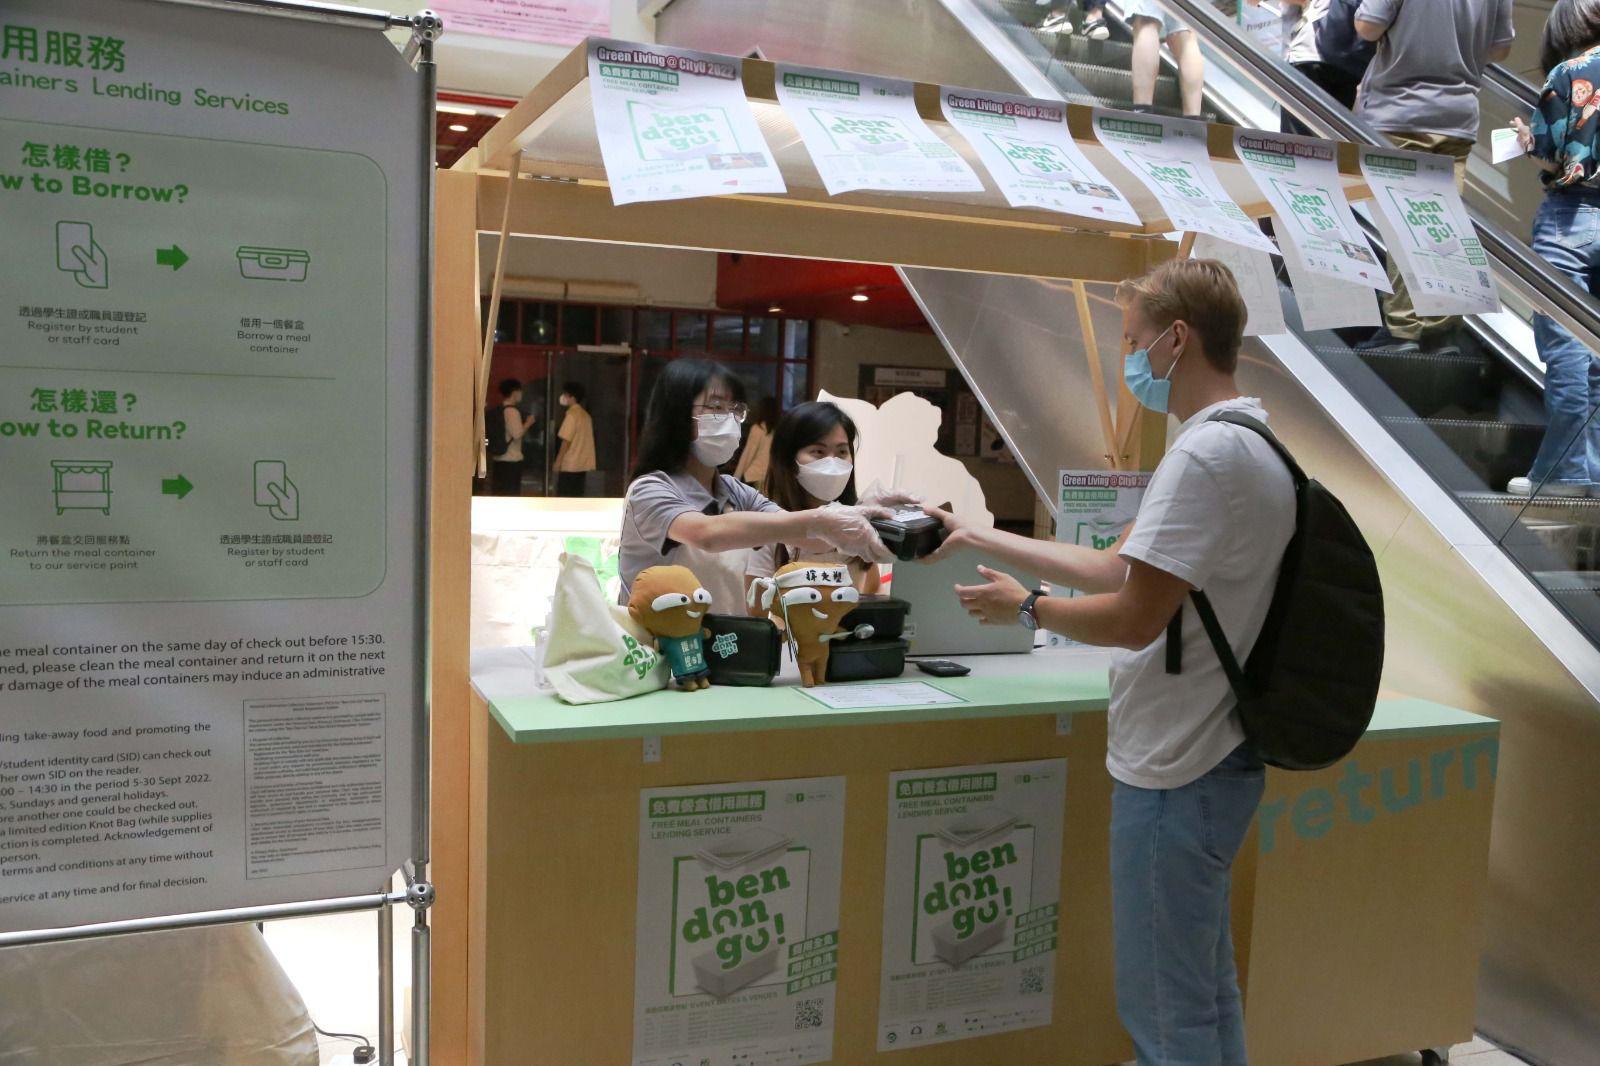 The Environmental Campaign Committee today (September 5) launched the Pilot Scheme for Lending of Reusable Meal Containers, which operates under the "ben don go!" name, in seven universities to promote a plastic-free takeaway culture. Photo shows a participant borrowing a reusable meal container at a university service point and practising a plastic-free takeaway culture.